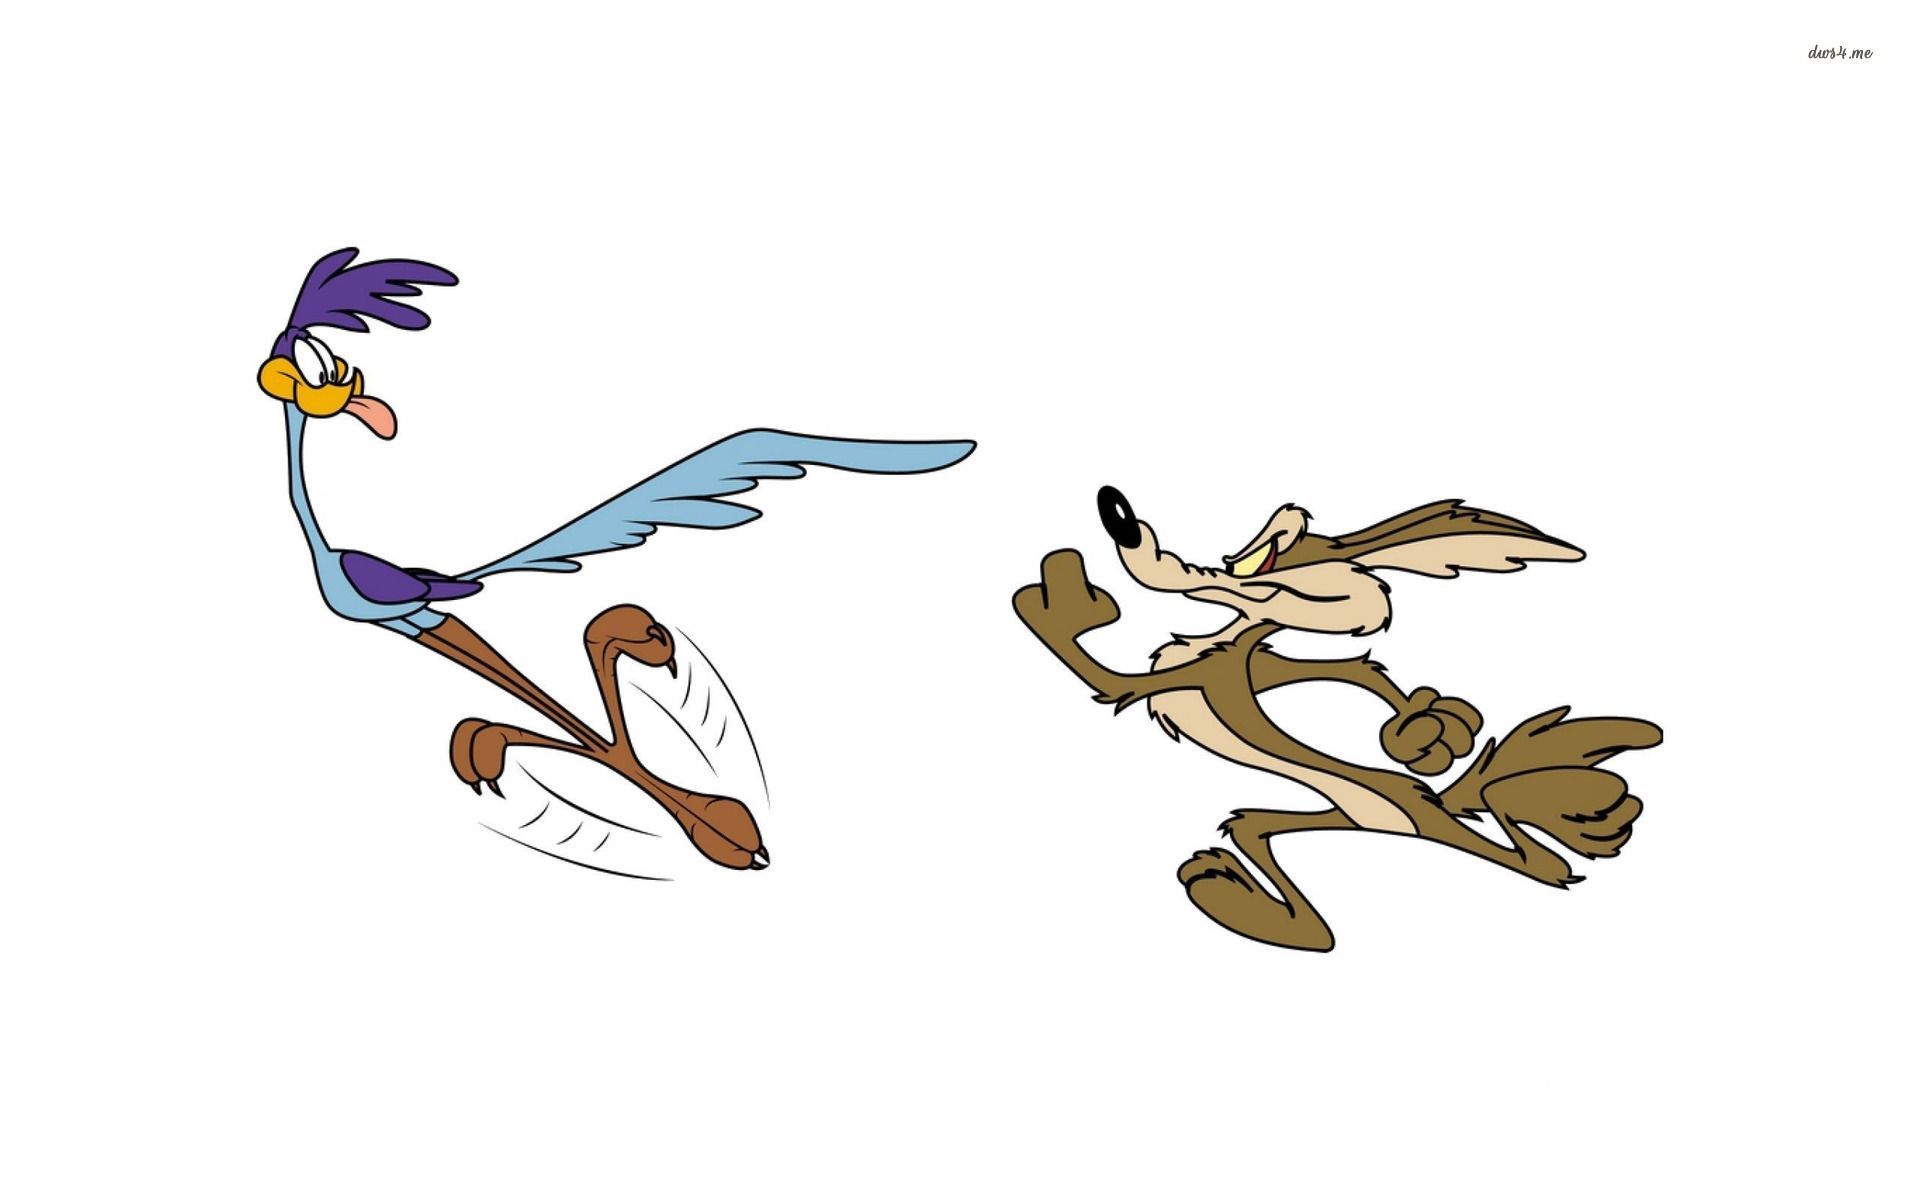 Wile E. Coyote and The Road Runner wallpaper wallpaper